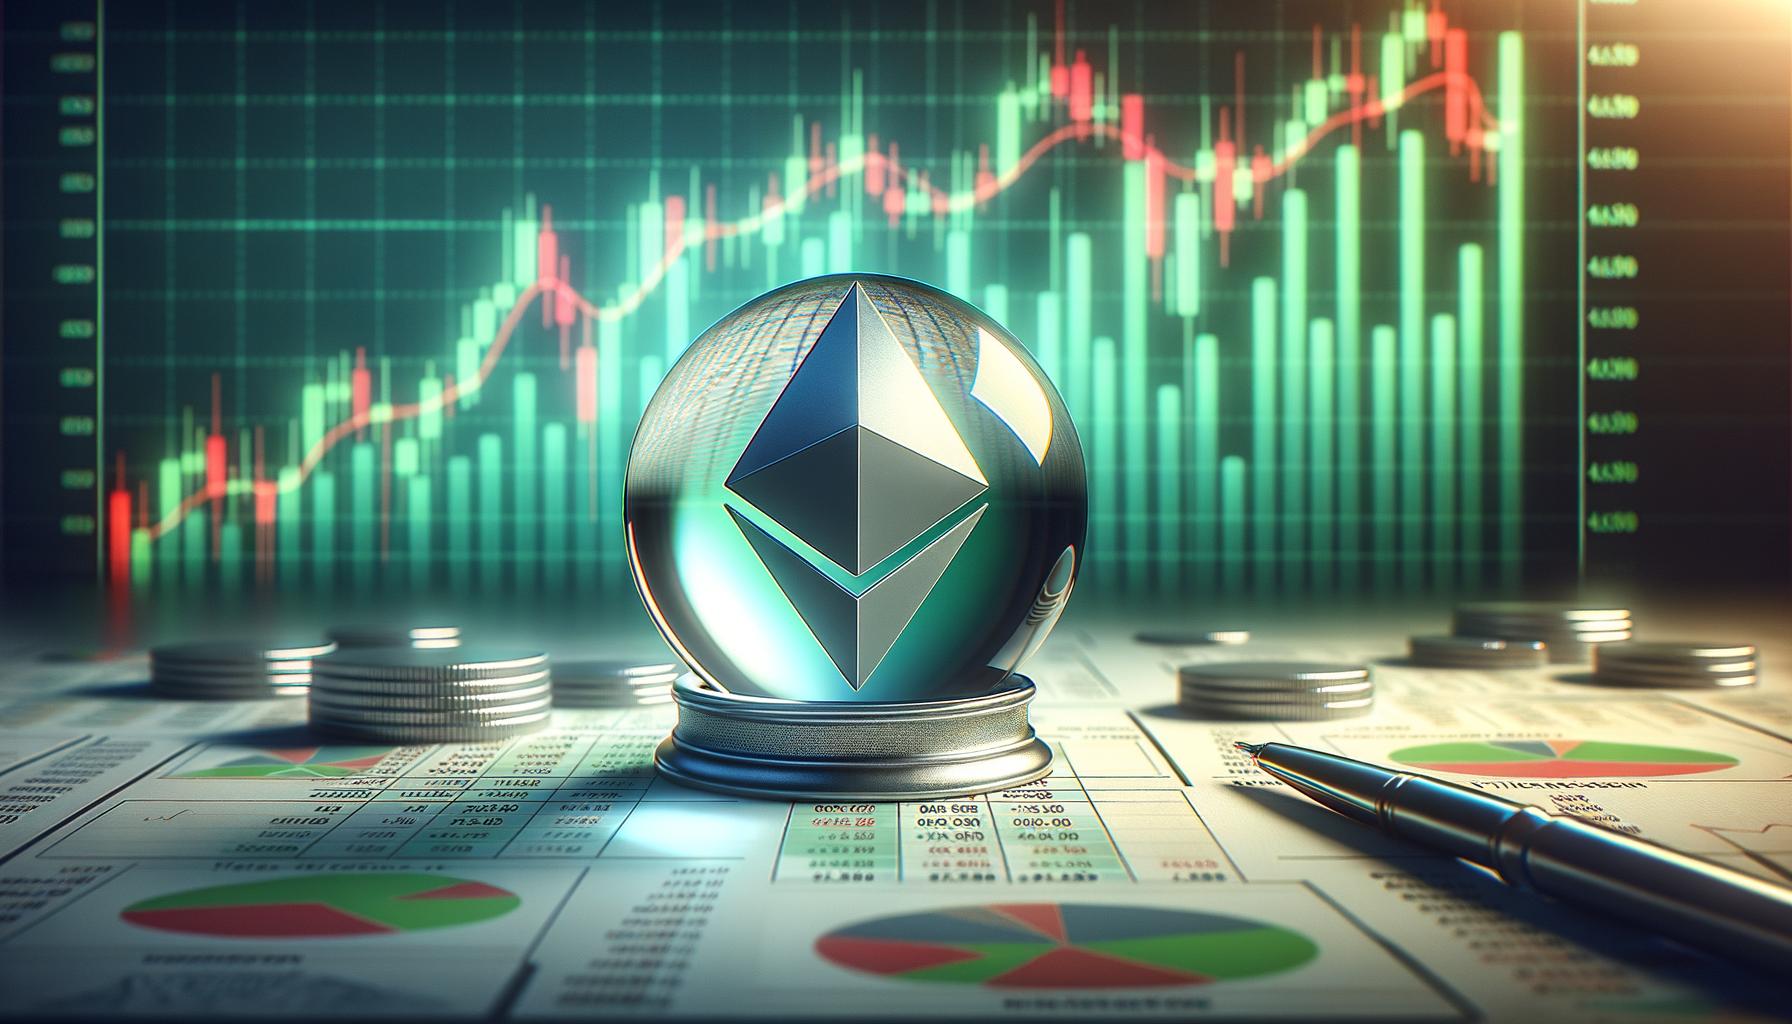 Ethereum (ETH) Price Holds Support Above $3,650, Preparing for the Next Move Up Toward $4,000